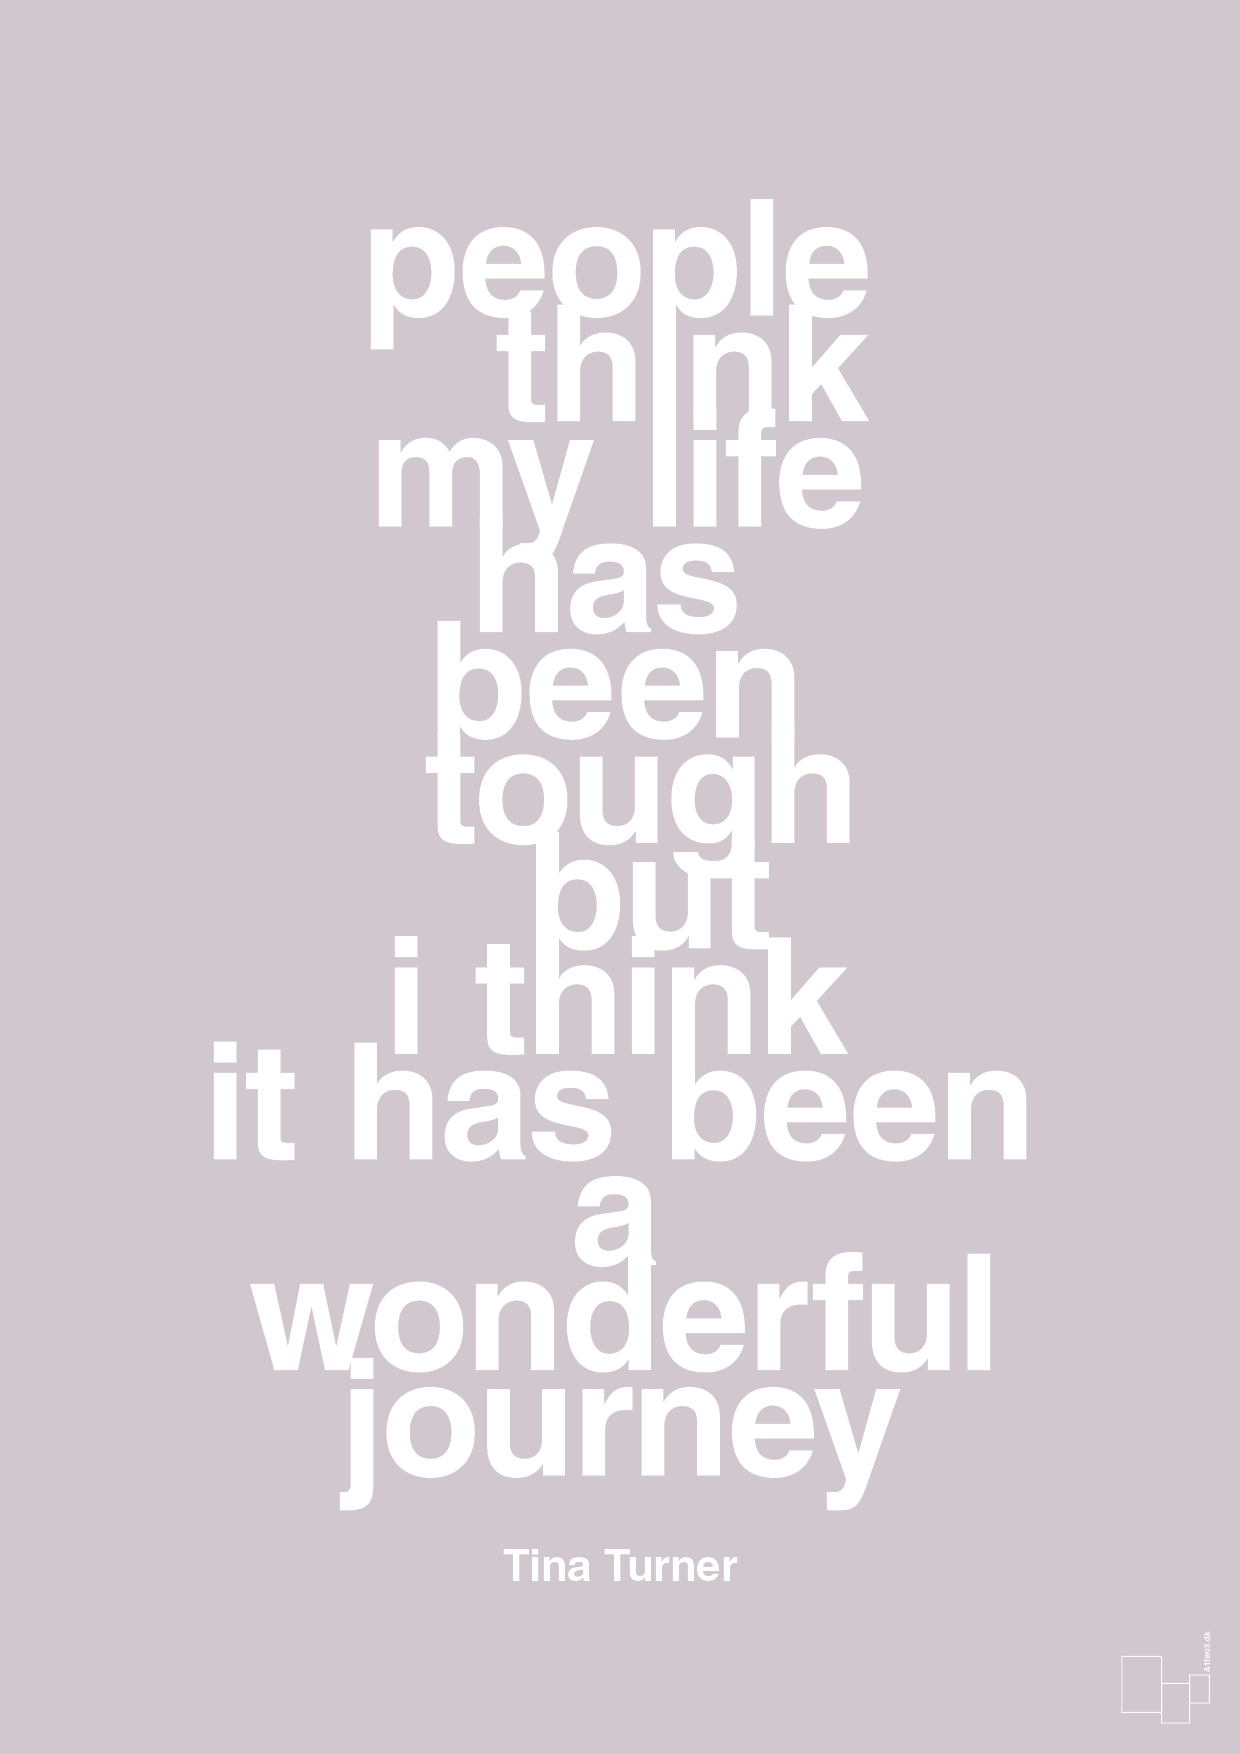 people think my life has been tough but I think it’s been a wonderful journey - Plakat med Citater i Dusty Lilac